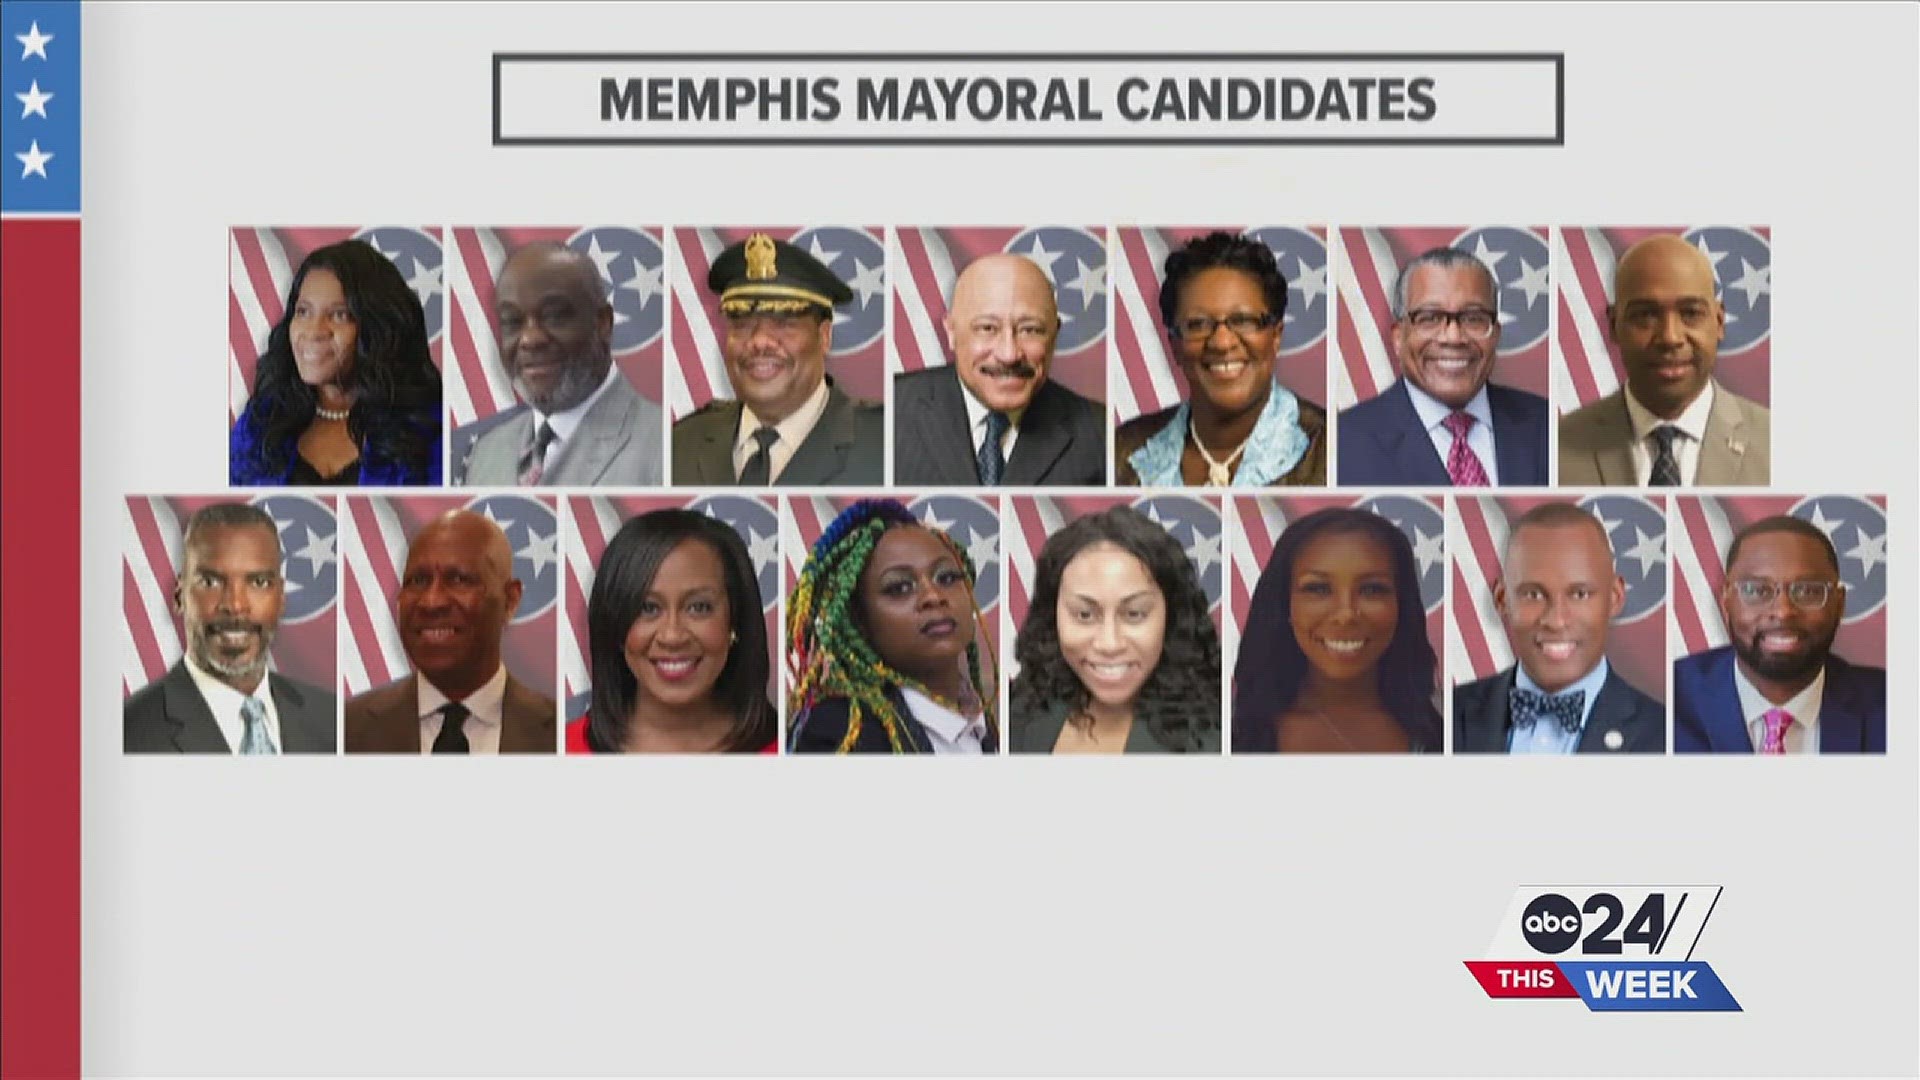 As early voting begins Sept. 15 and three televised debates are set for the Memphis mayoral candidates, ABC24 takes a look at a "crucial week" for the election.